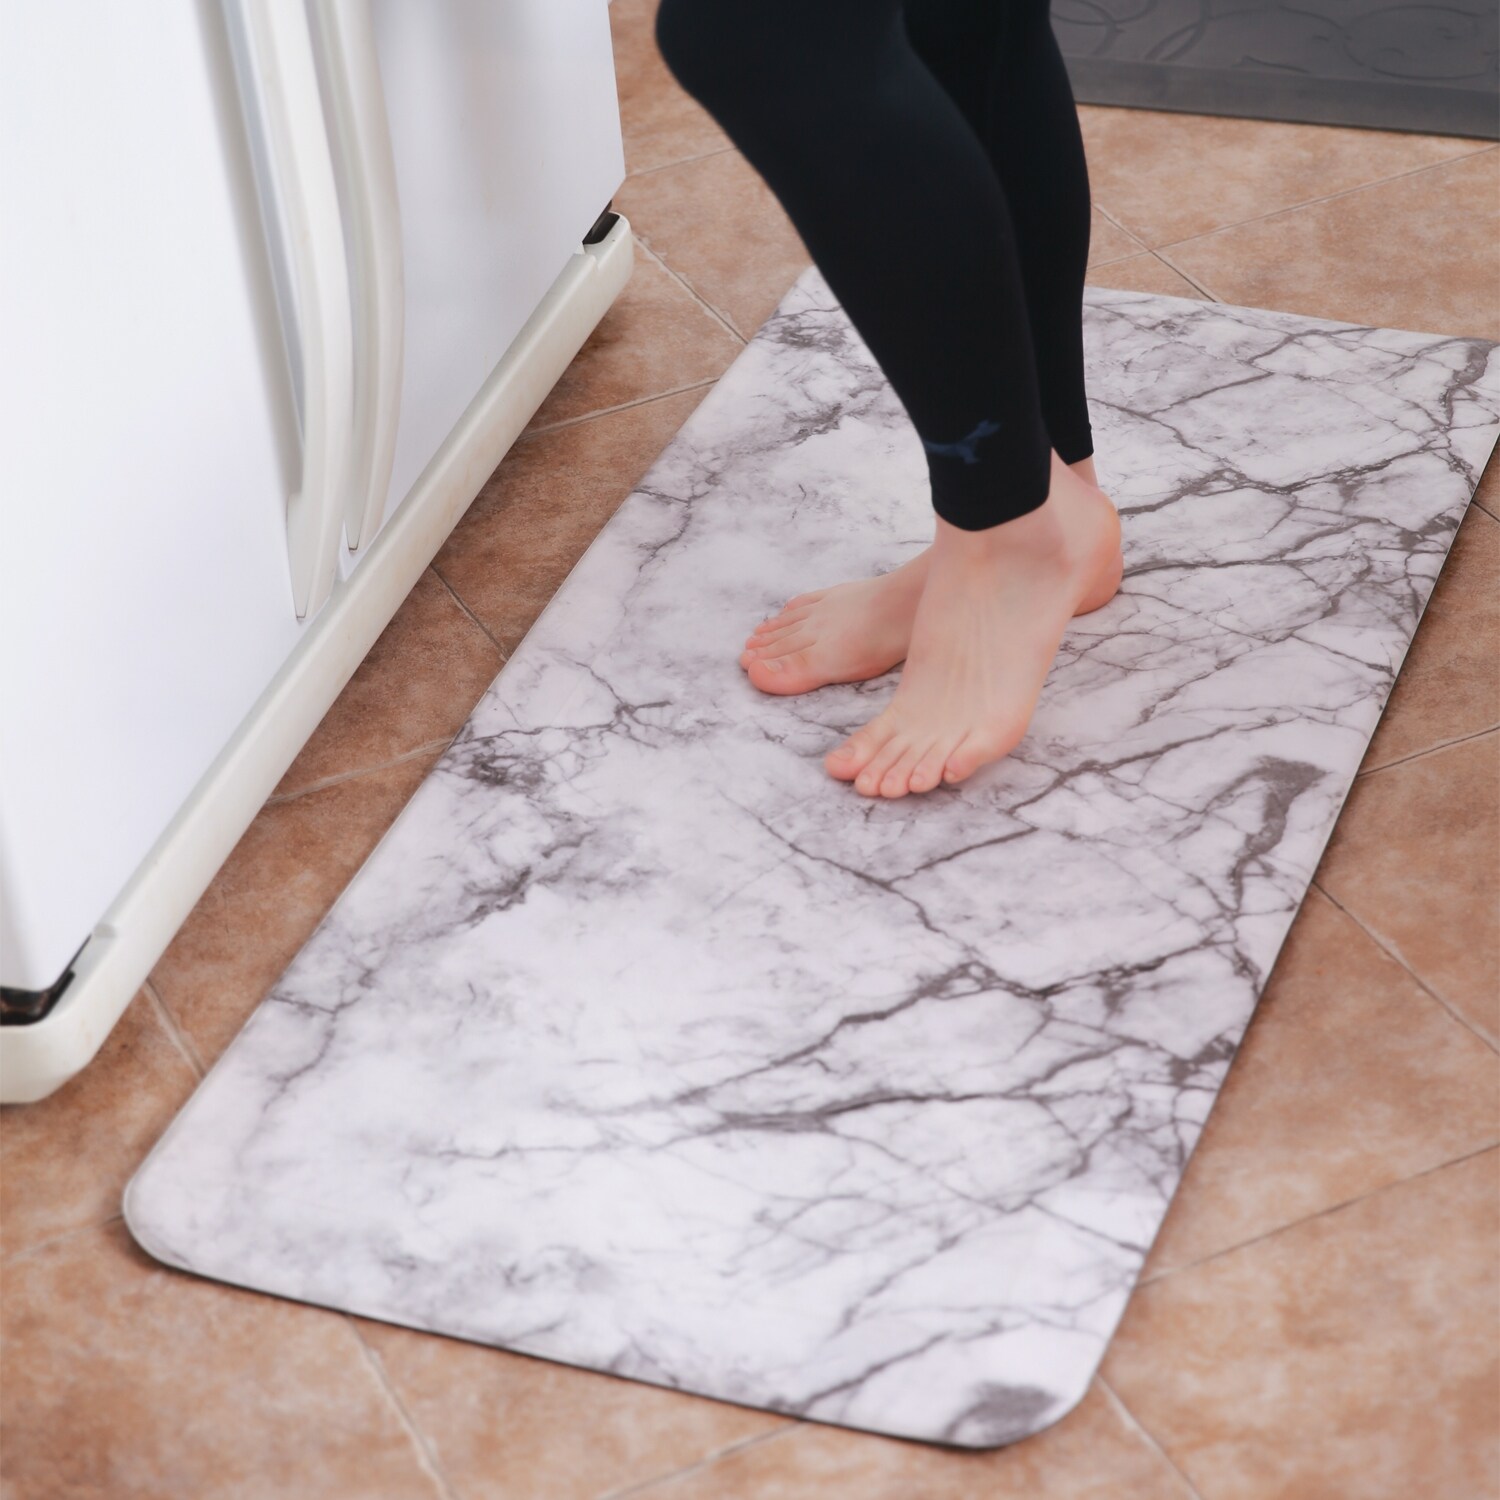 https://ak1.ostkcdn.com/images/products/is/images/direct/62a2819a258f20ad38c56d5fef469c74bbc9bef2/FRESHMINT-Anti-Fatigue-Marble-Print-Mats-%2C-Perfect-for-Kitchens-and-Standing-Desks-42-x-20-Inch.jpg